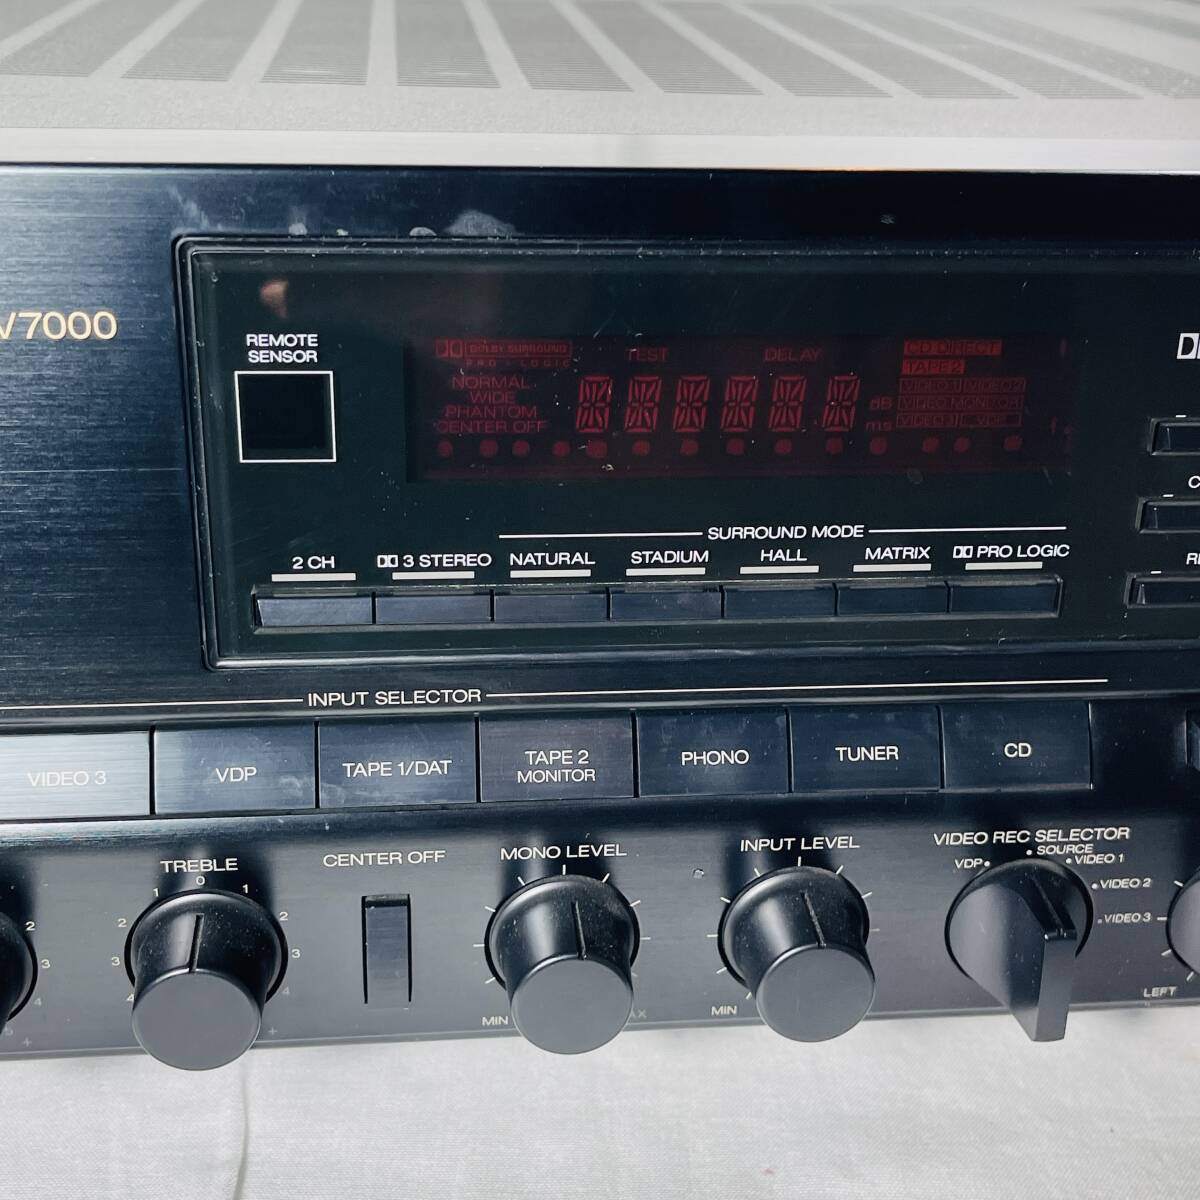 AV amplifier SANSUI INTEGRATED AV SURROUND AMPLFIER AU-V7000 Surround amplifier operation goods record sound out has confirmed USED goods connection verification only 